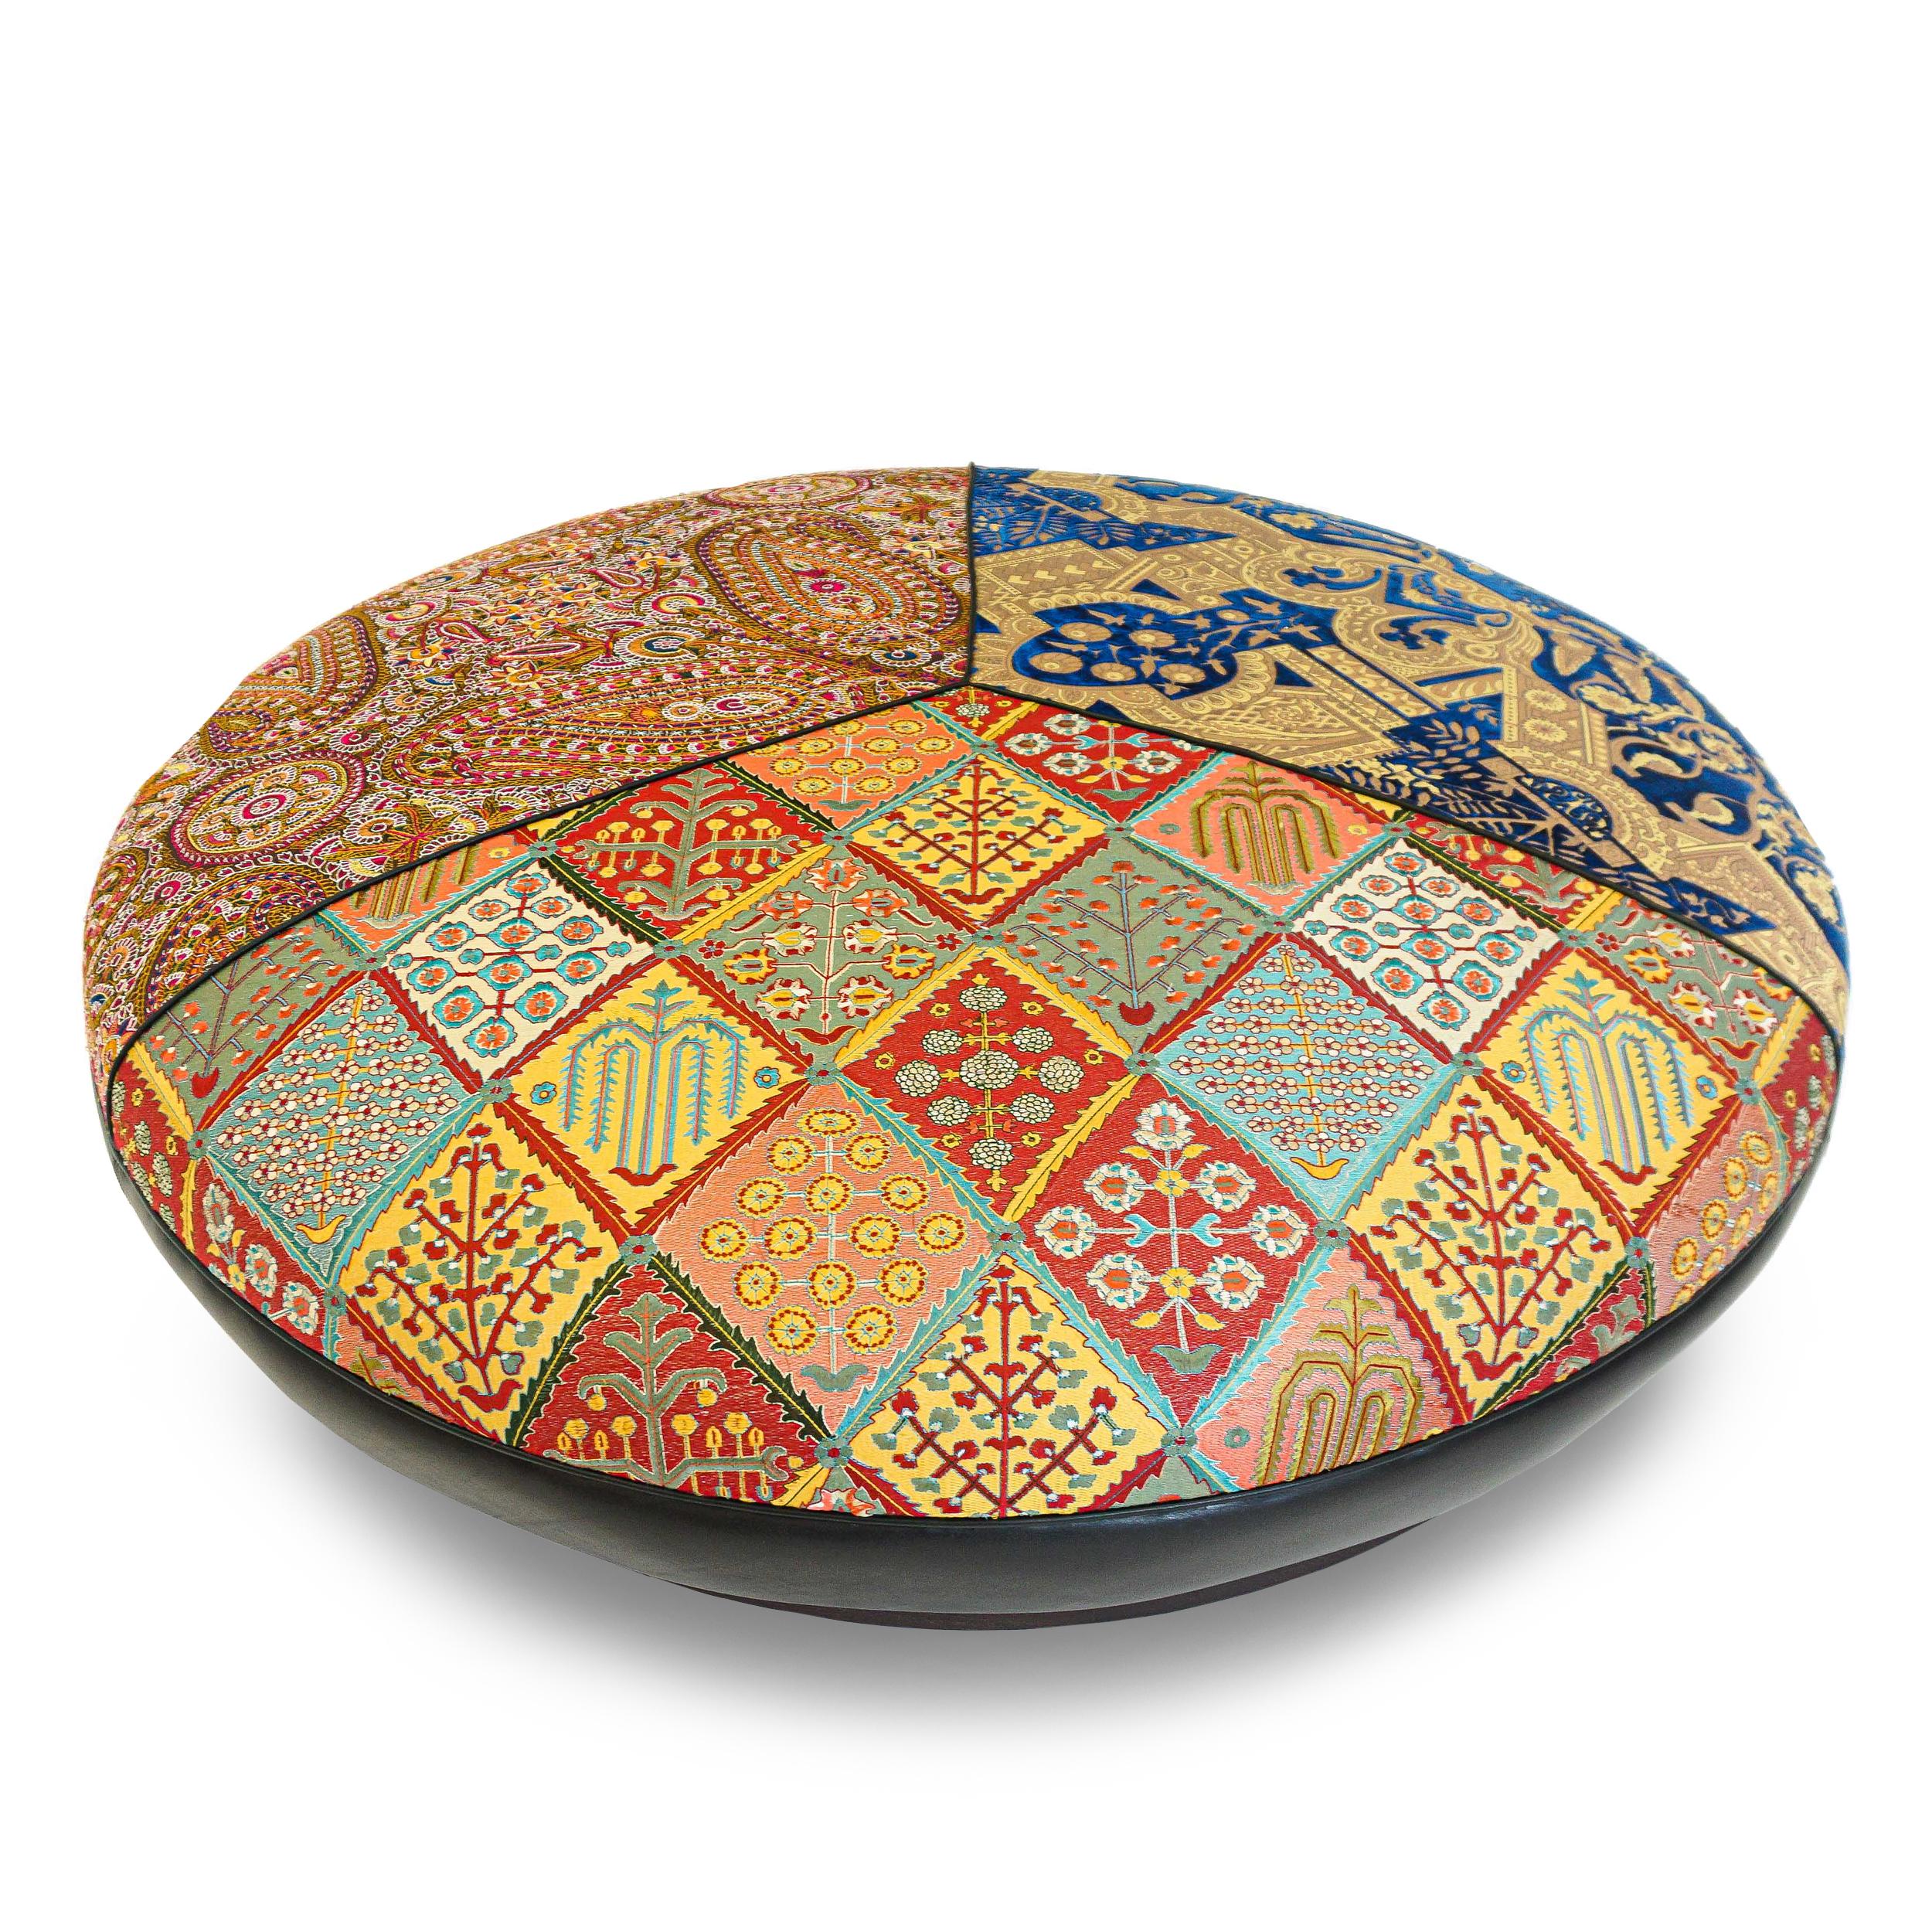 Leather Large Round Upholstered Moroccan-Inspired Ottoman, Customizable For Sale